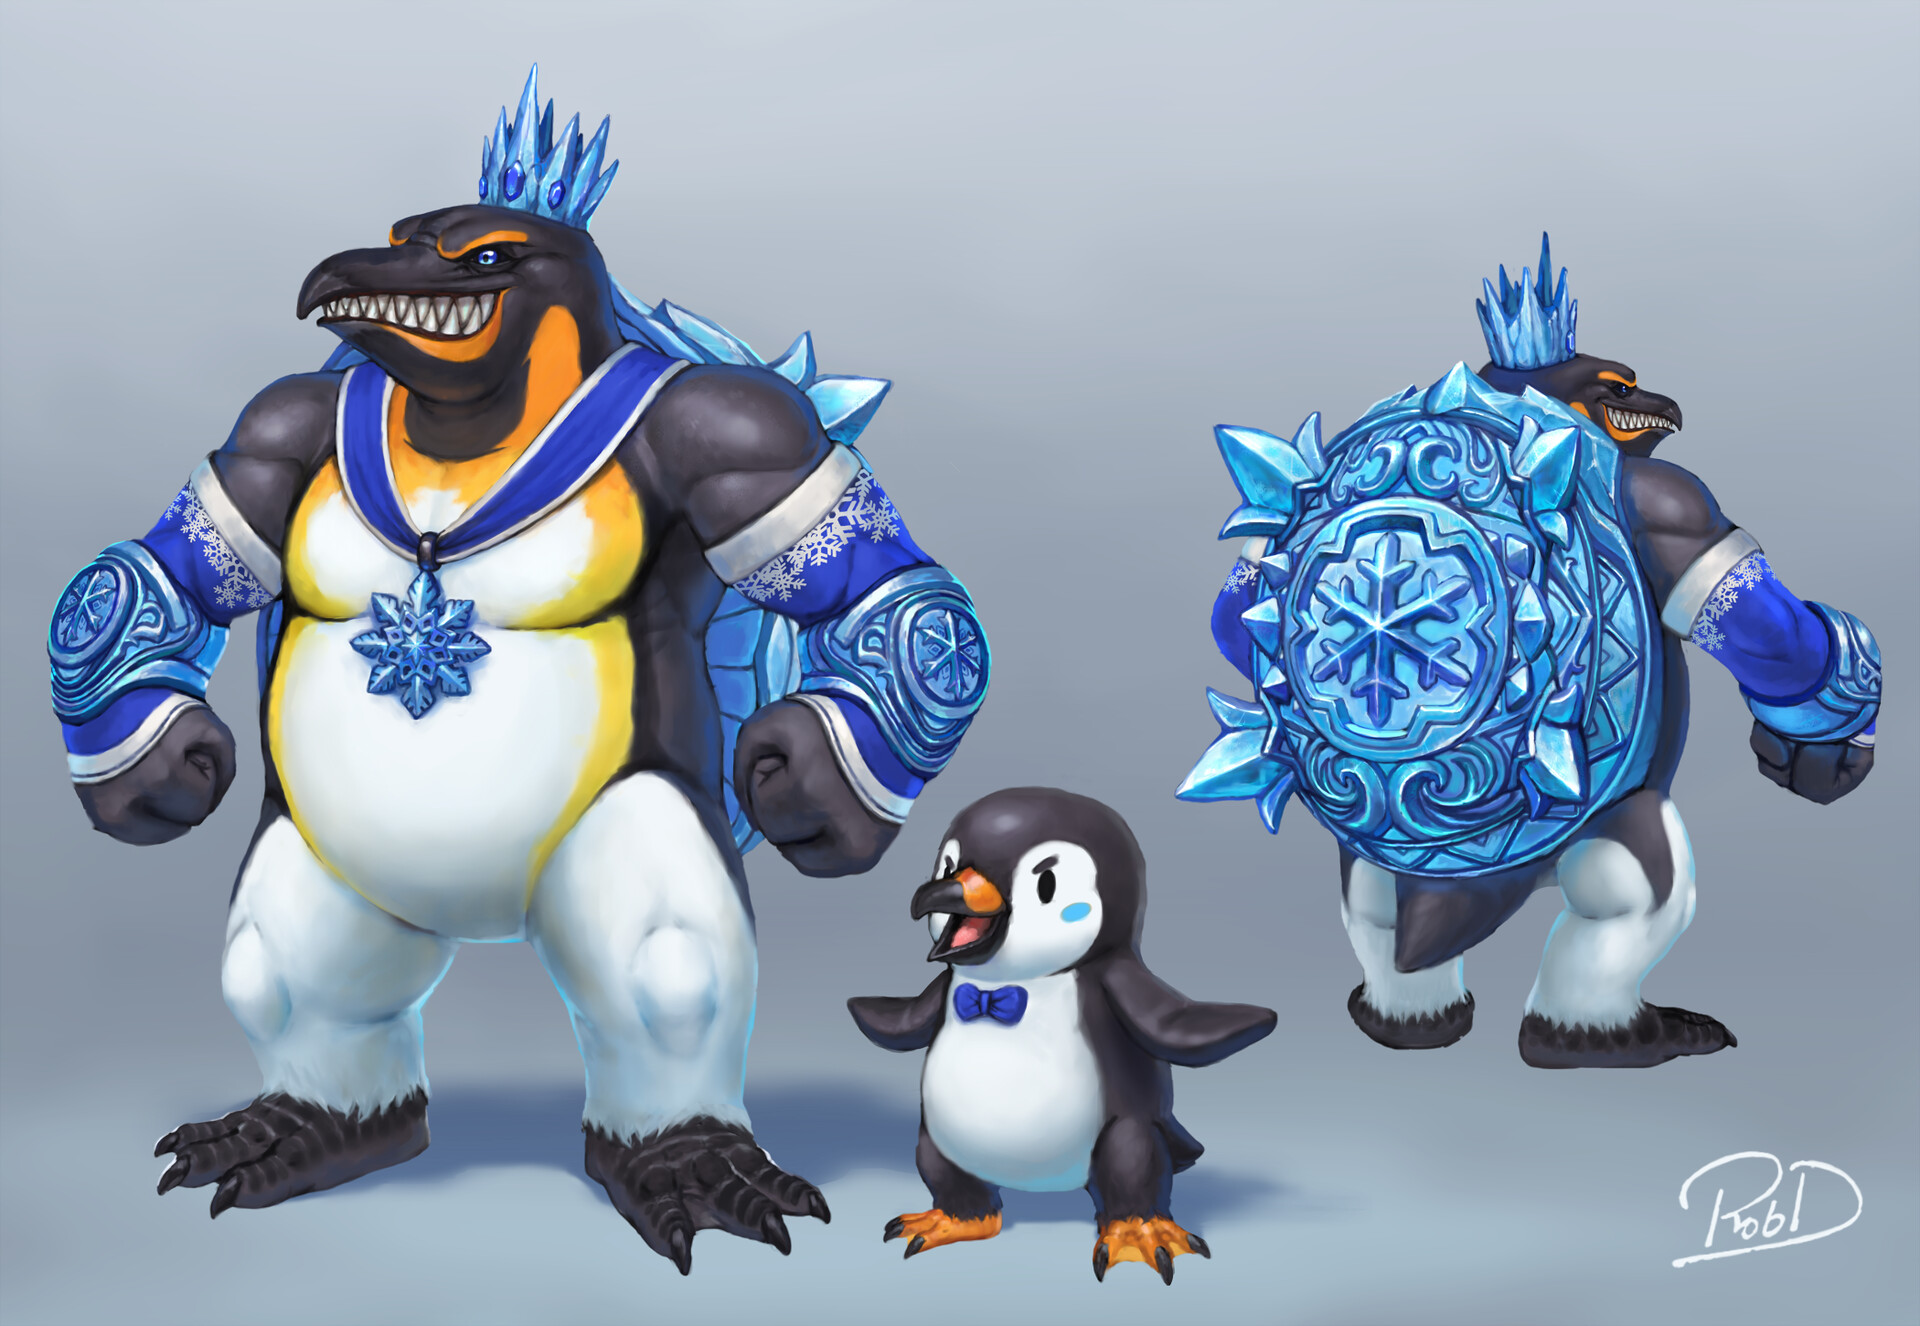 Fan Skin Concept for Kuzenbo, a character from Smite.